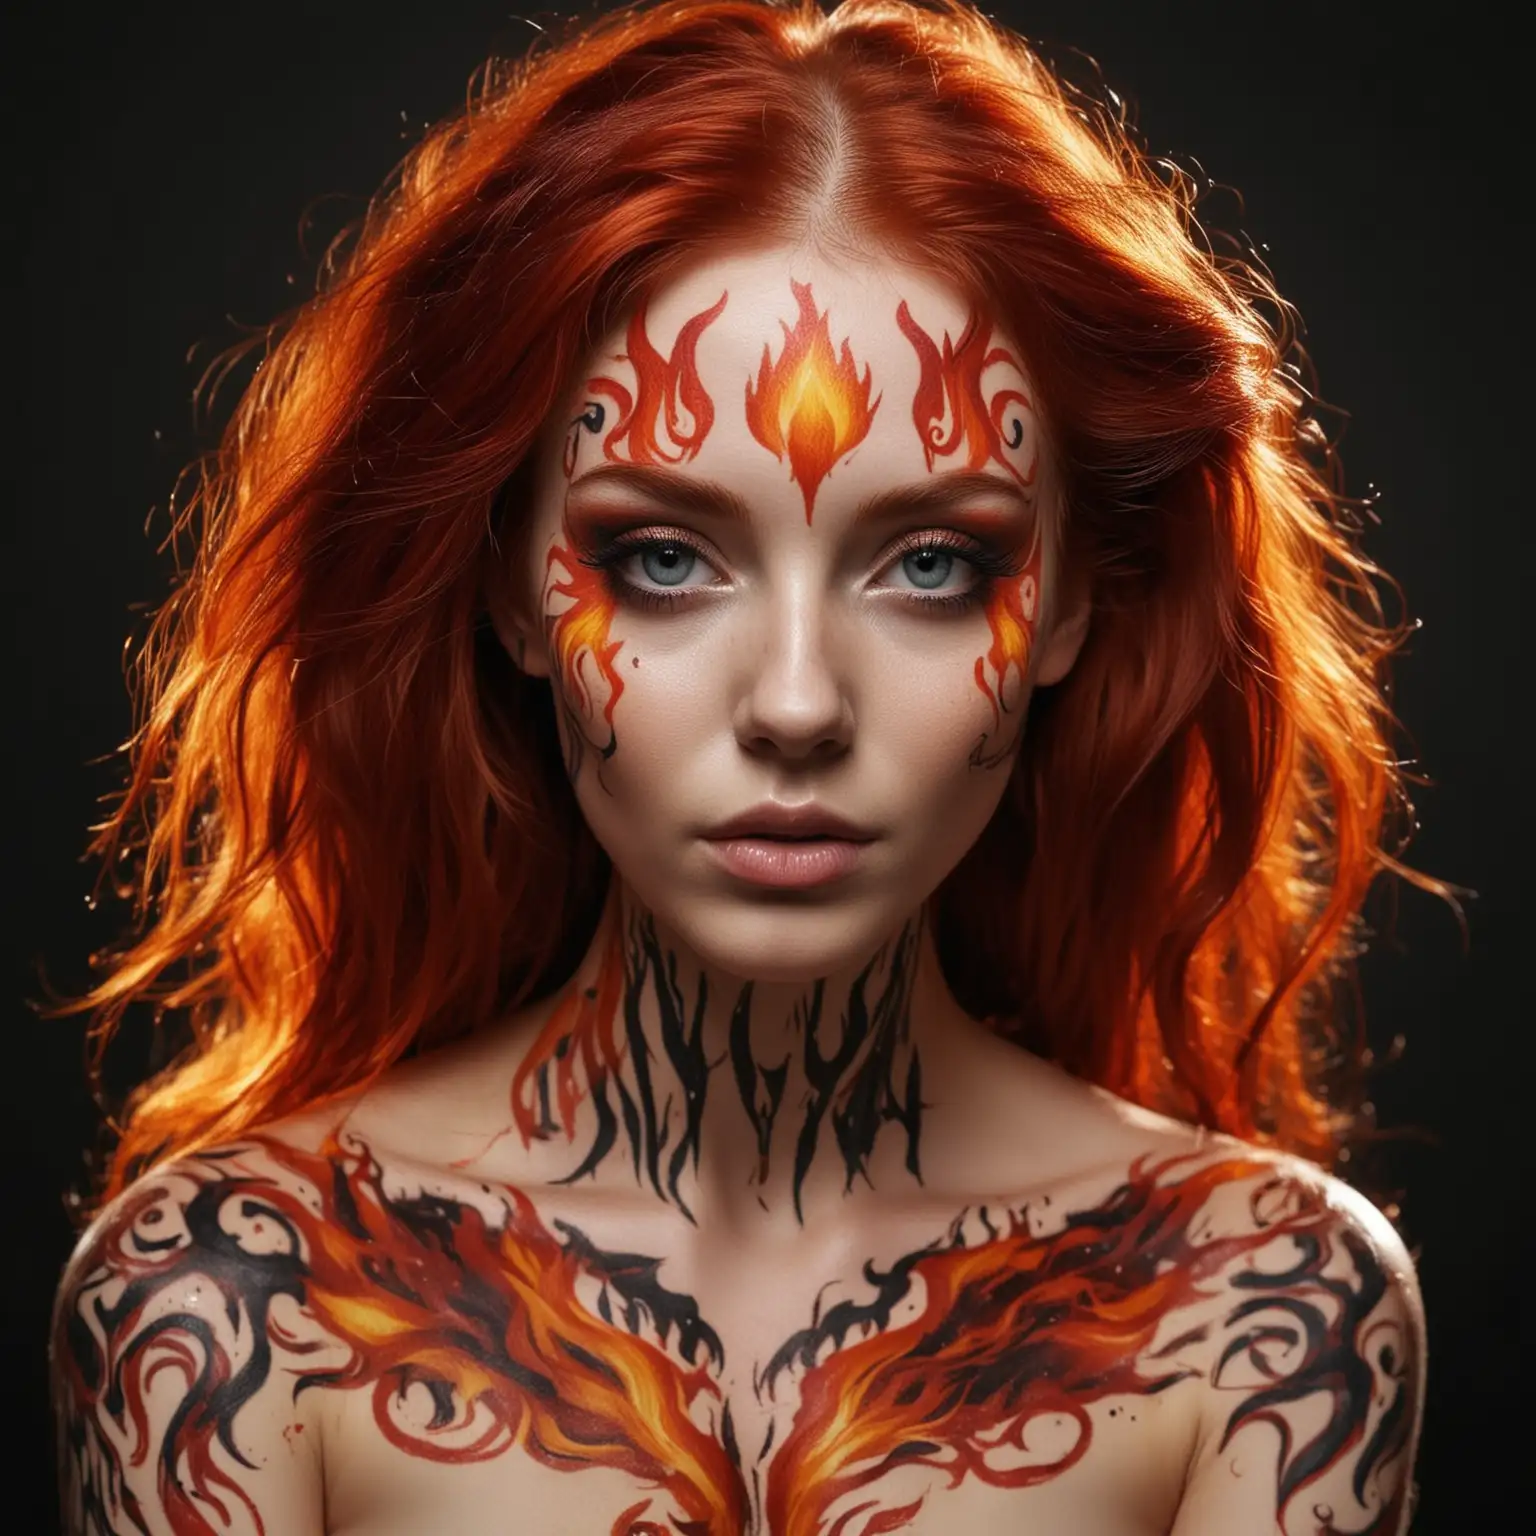 Fiery-RedHaired-Girl-with-Flame-Body-Art